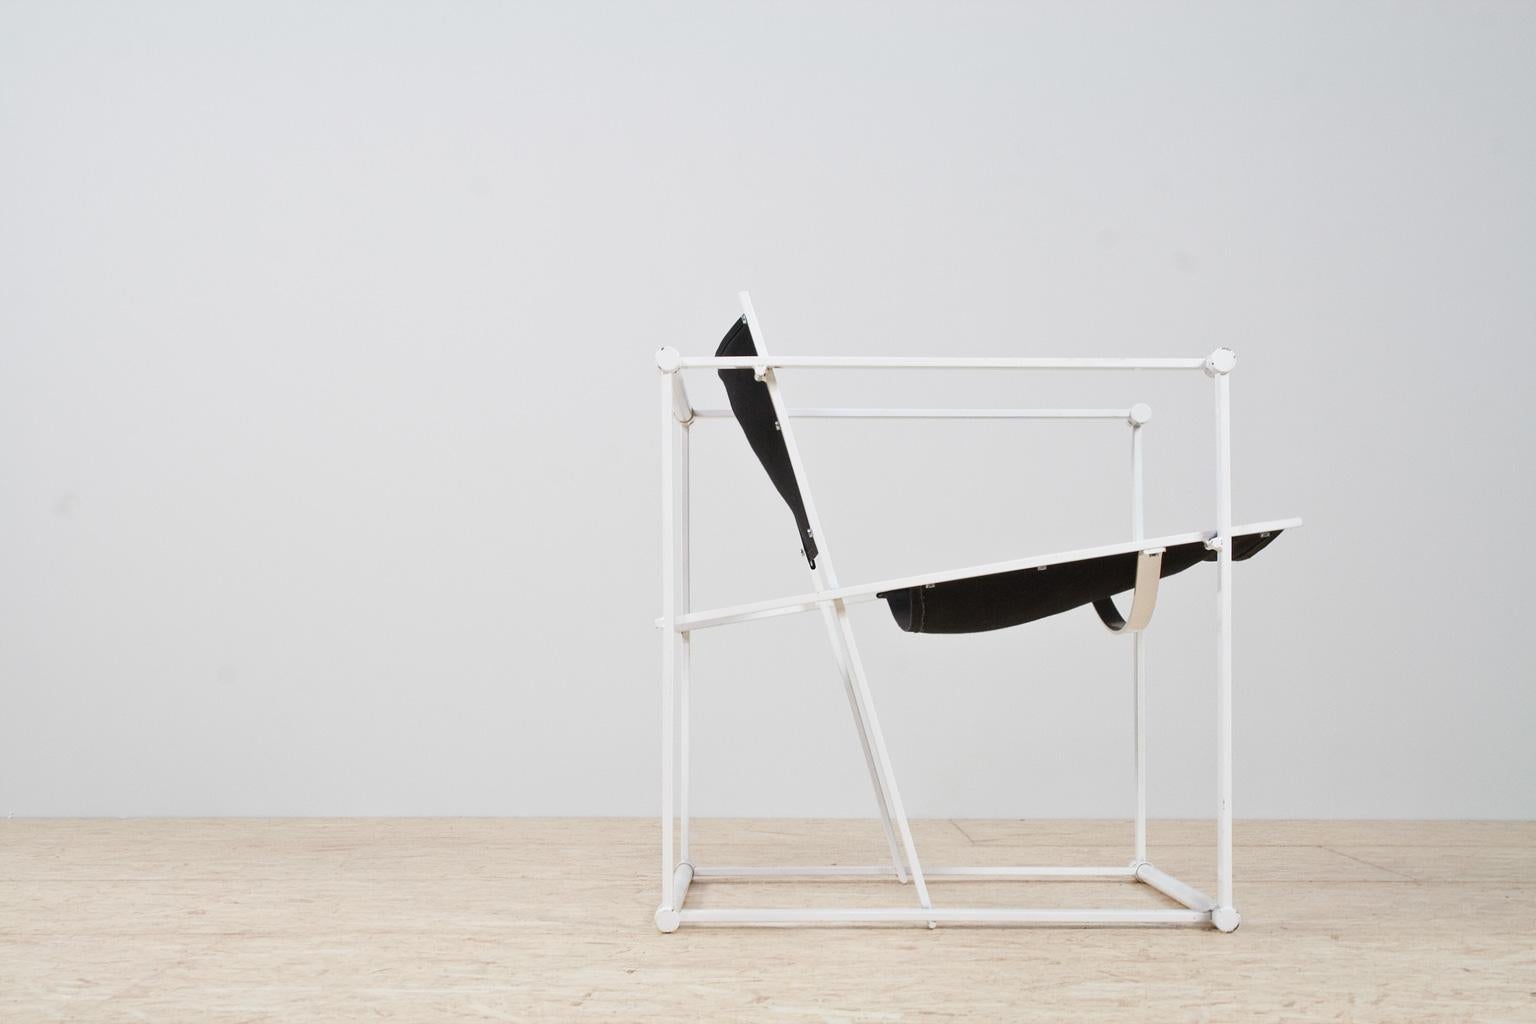 Iconic Bauhaus style and Minimalist armchair in black and white by Radboud Van Beekum for Pastoe, armchair model FM61, in steel and canvas, The Netherlands, 1981. 

This Minimalist design was first presented at the 1980 Triennial in Poznan. After